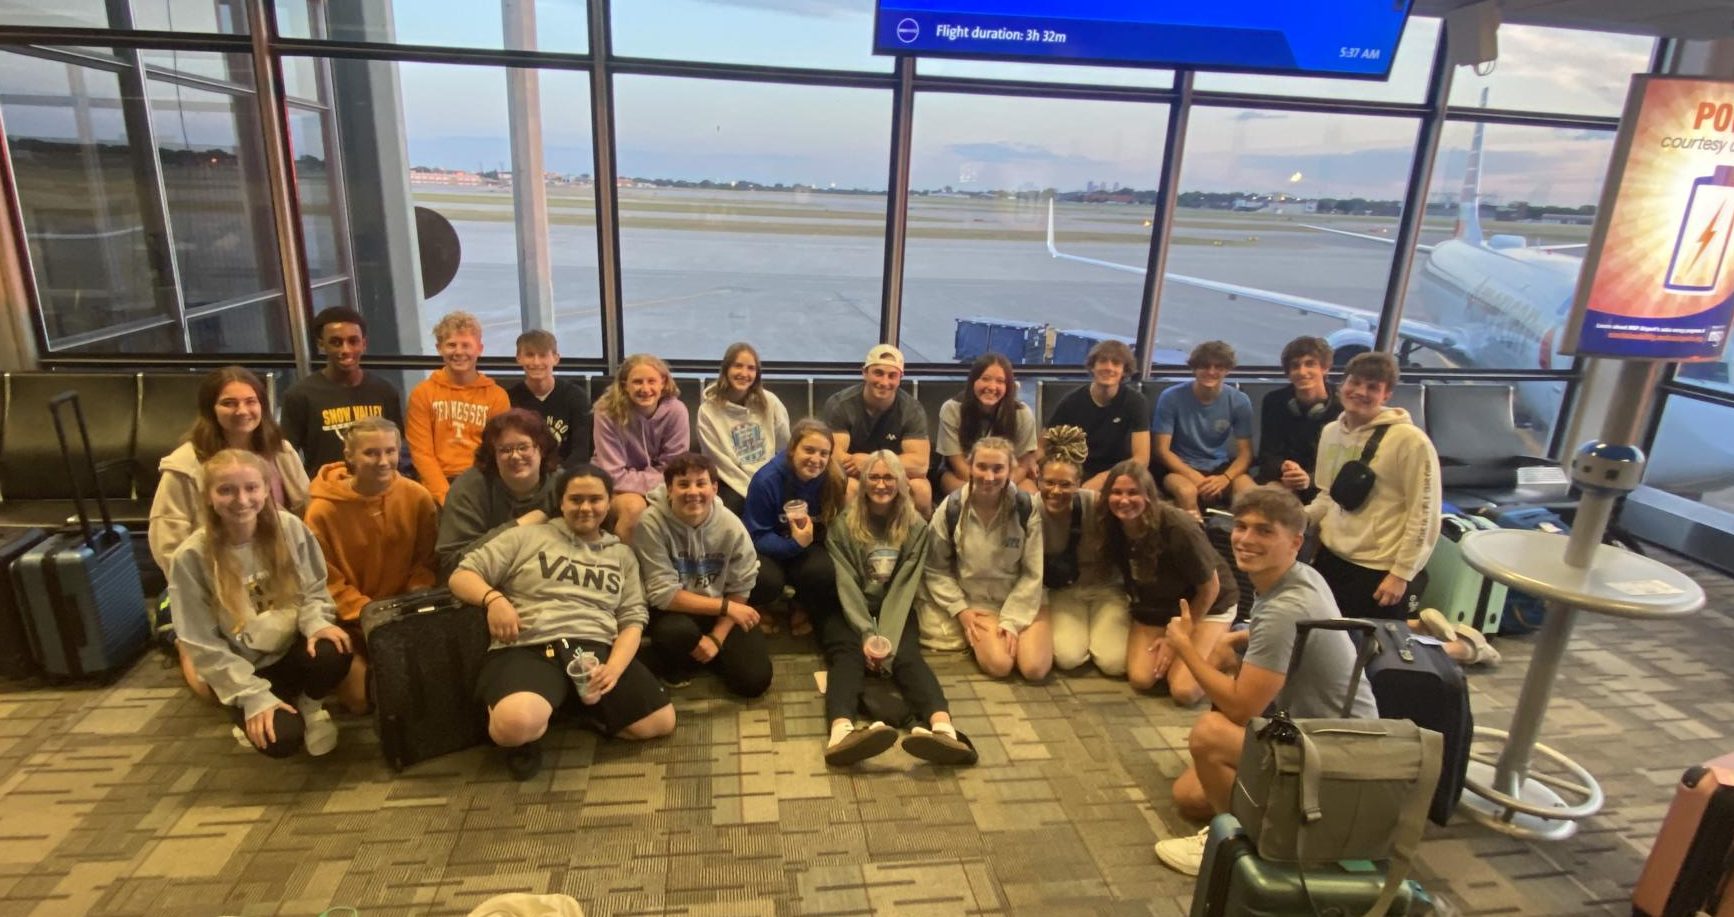 The group prepares to embark on their first flight on their journey to the Dominican Republic from the Minneapolis airport